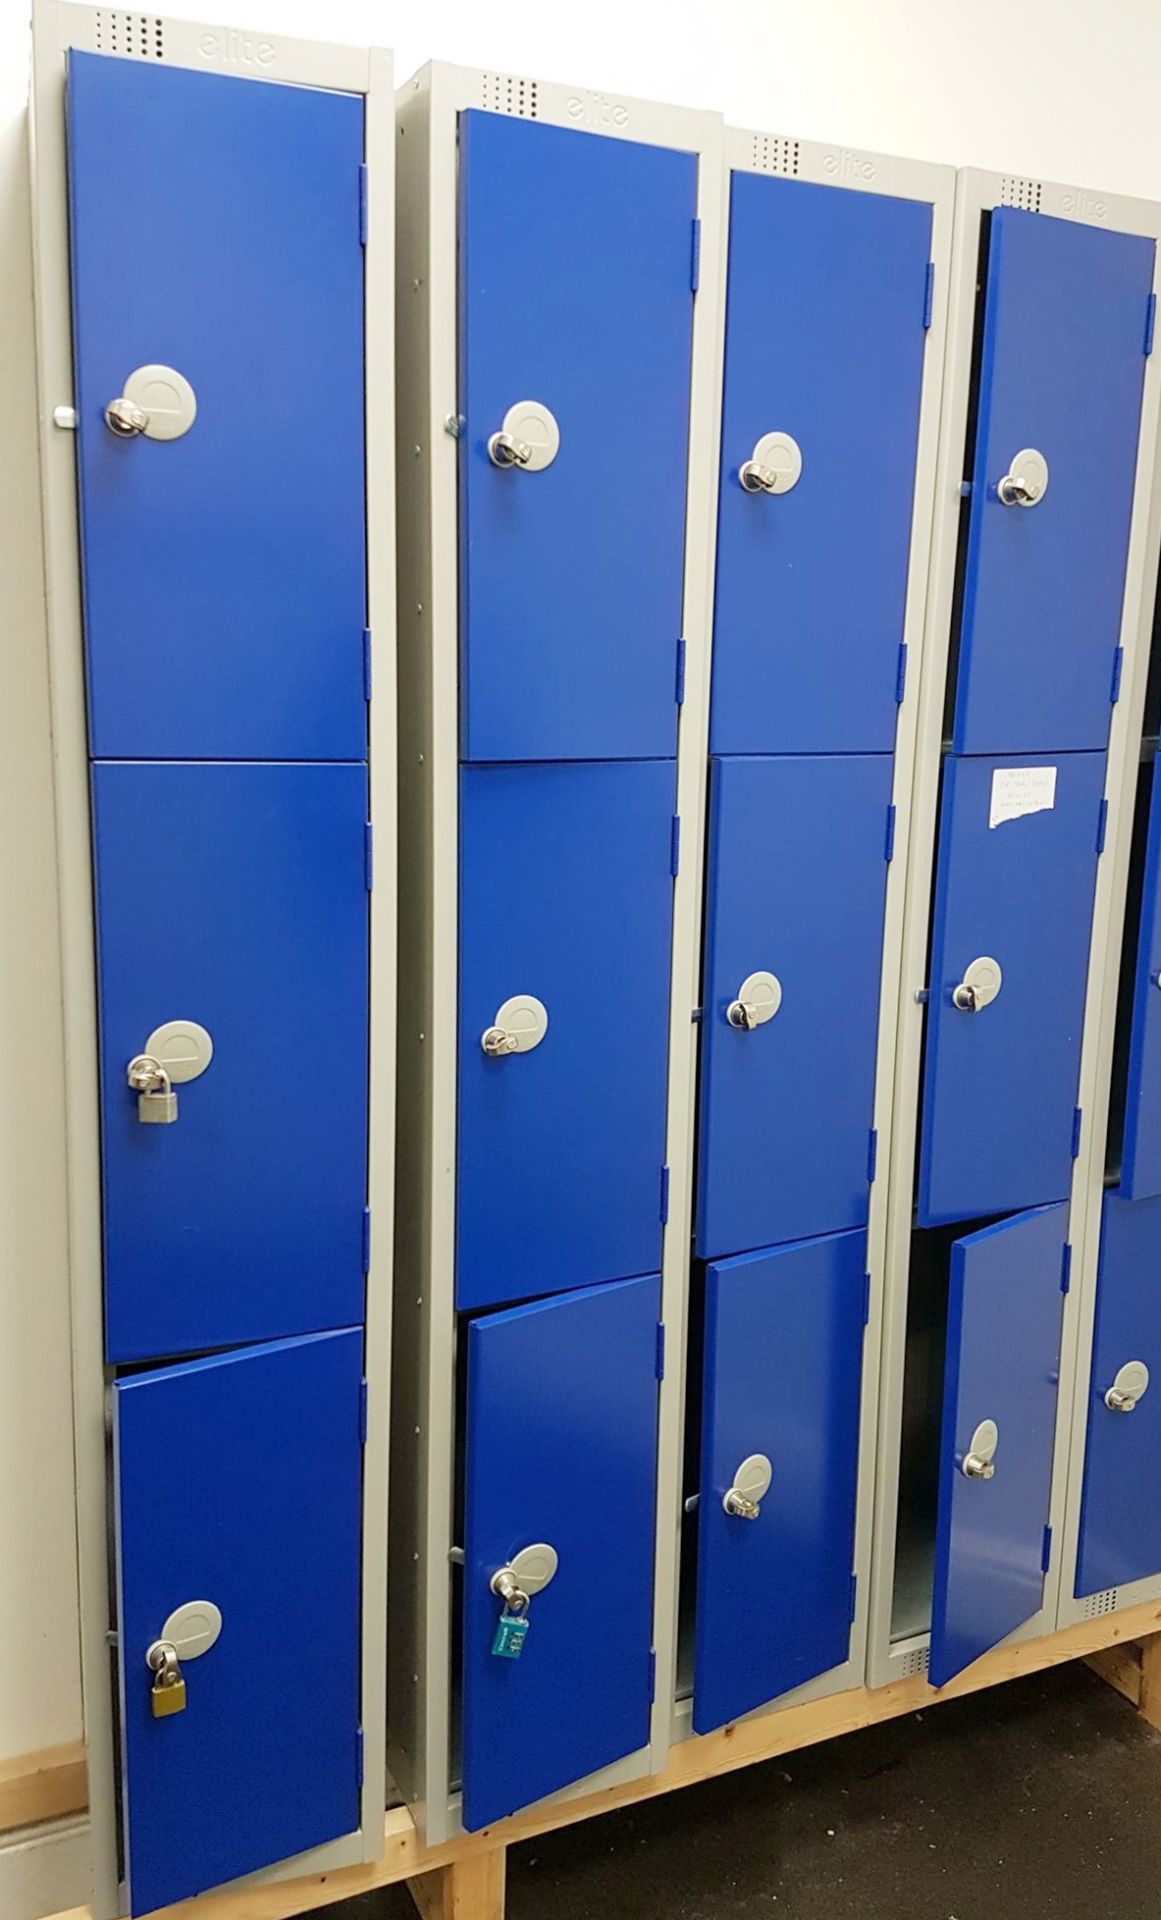 4 x Elite 3 Door Staff Clothes Lockers - Features Padlock Fittings, Welded and Riveted Steel - Image 2 of 6